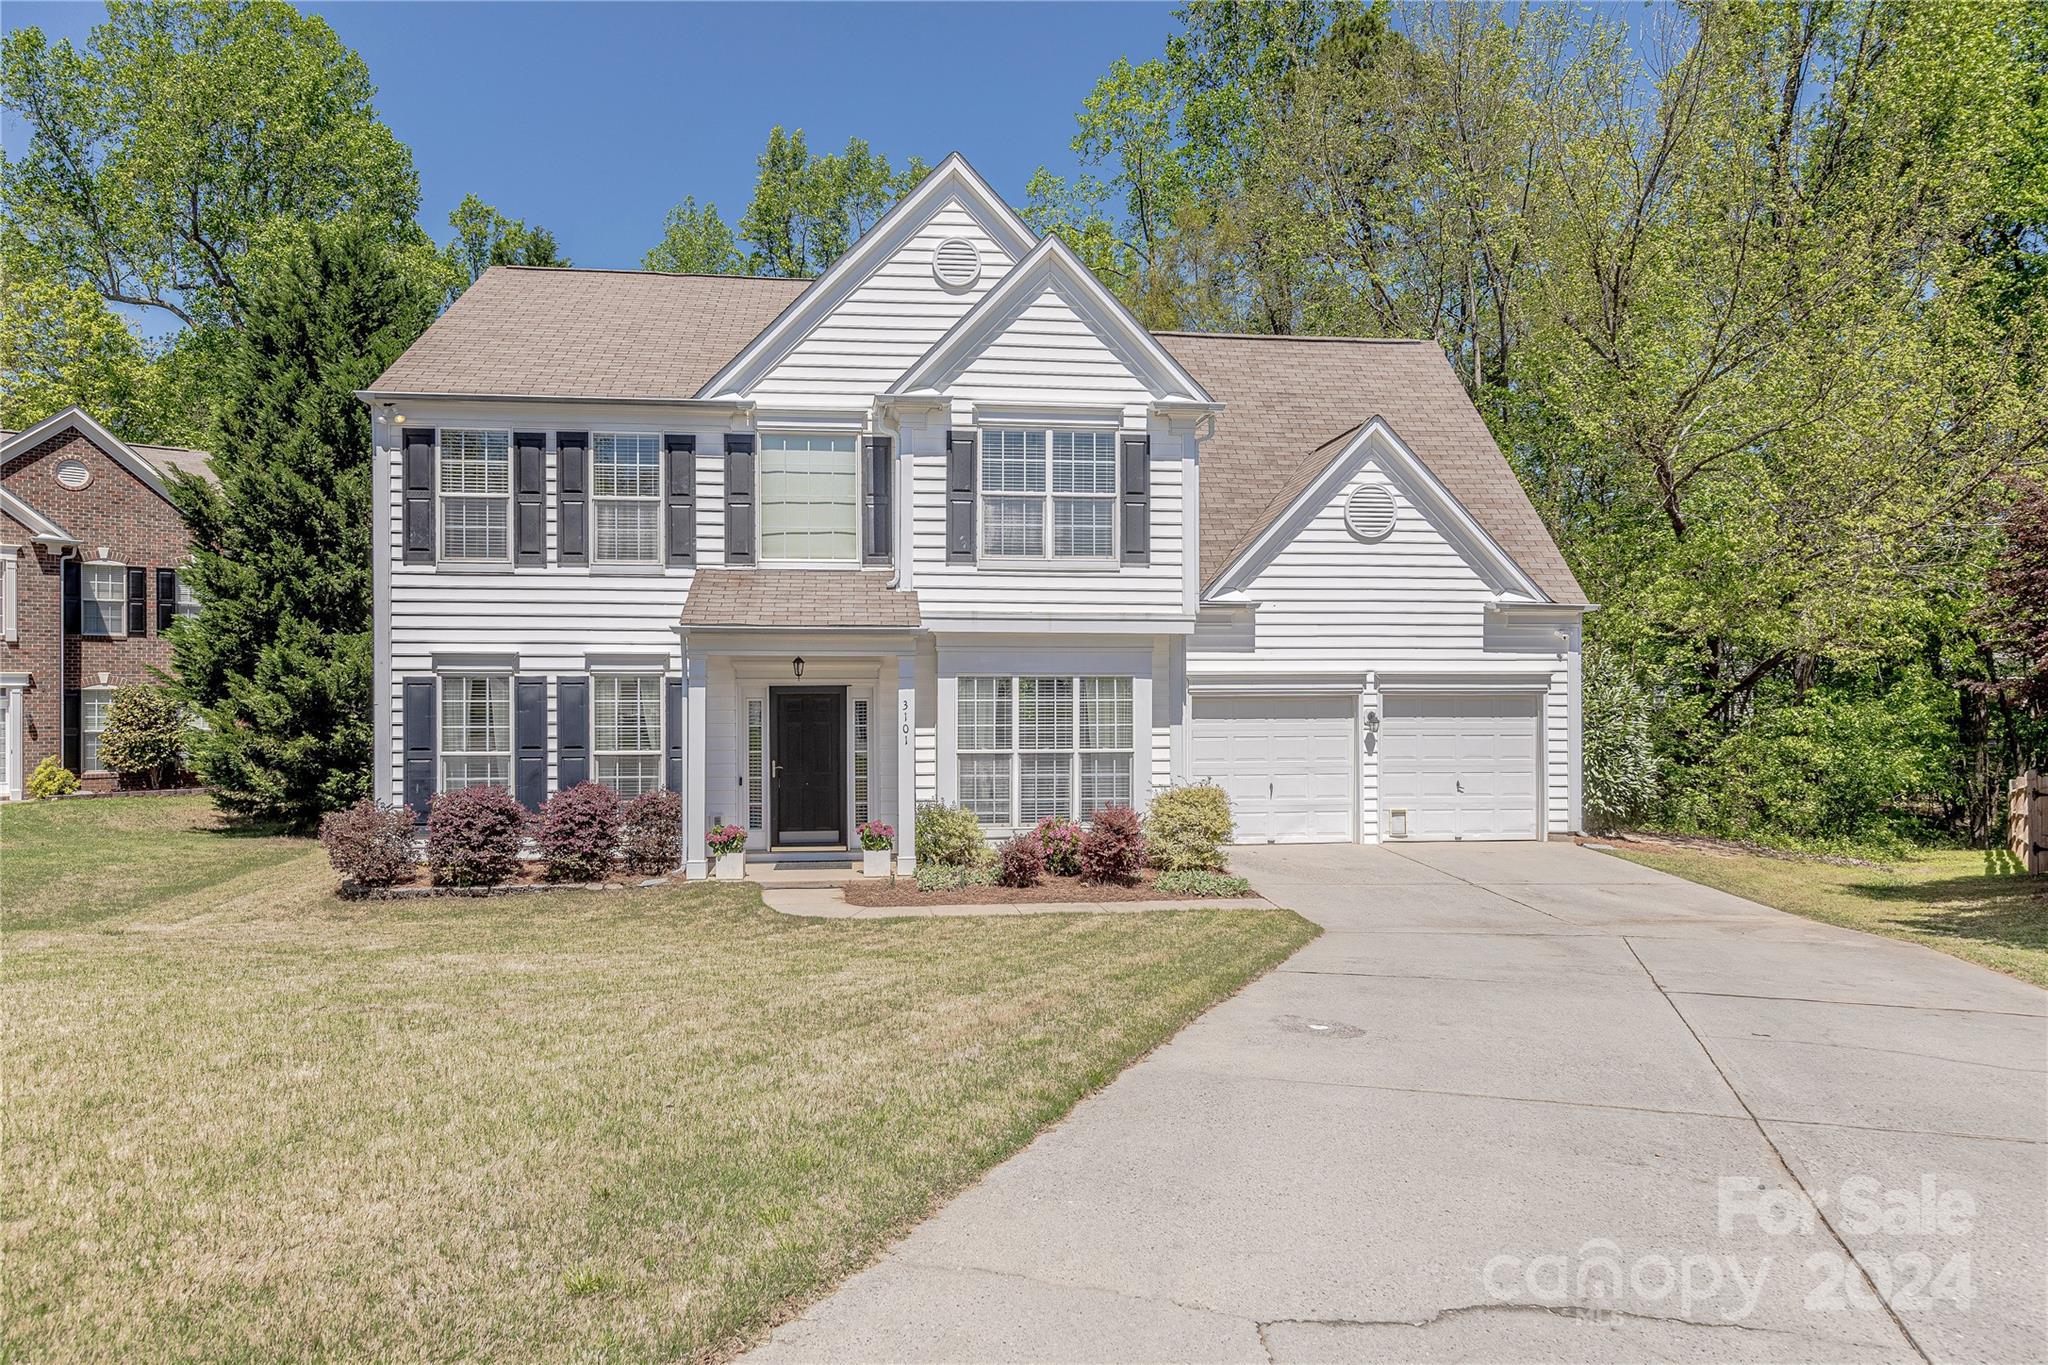 Photo one of 3101 Surreyhill Ct Charlotte NC 28270 | MLS 4128703